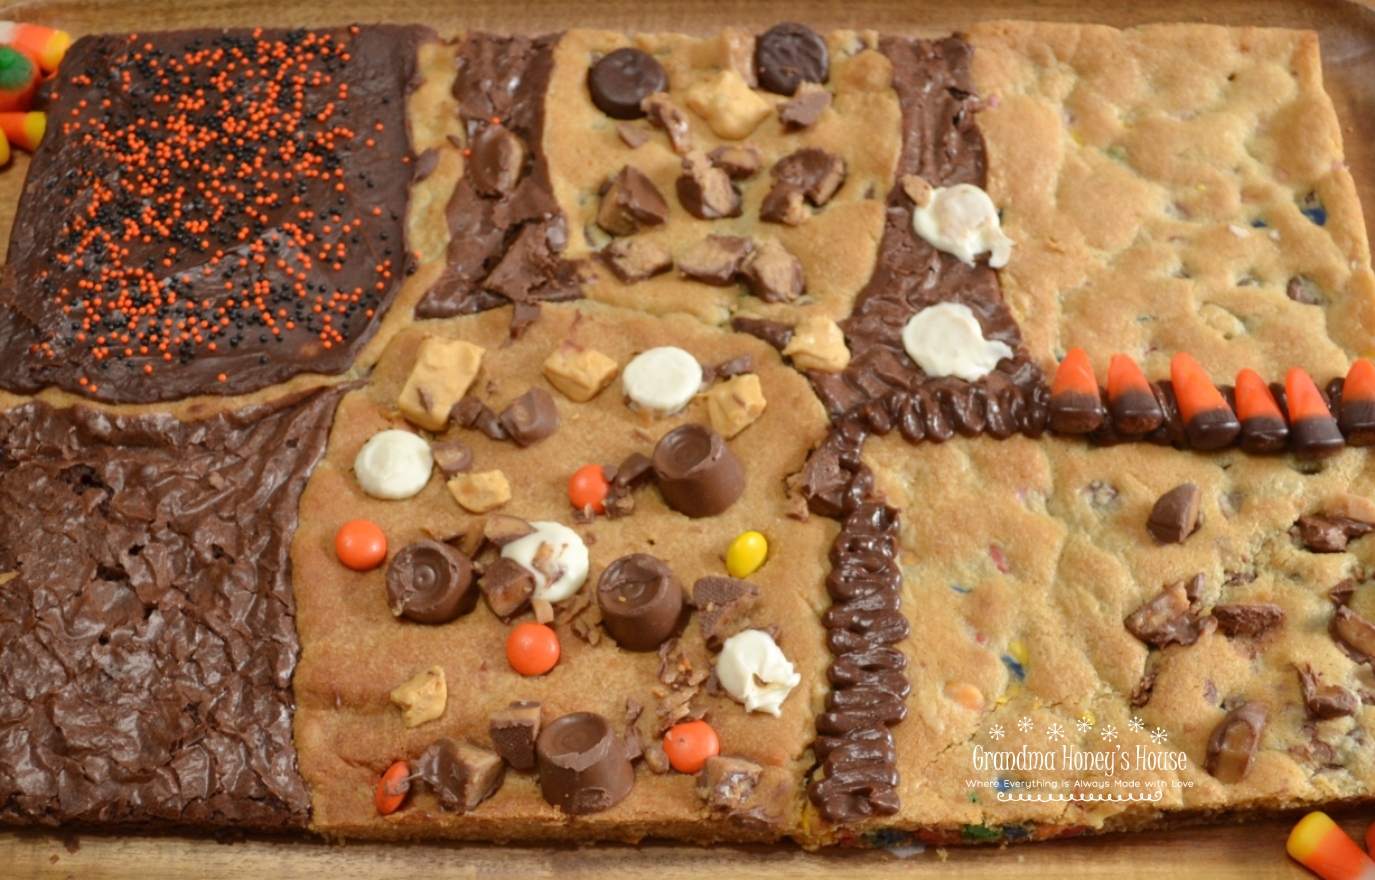 This Halloween Candy Bar Cookie is a mixture of different cookie dough, and brownie mix baked together on a sheet pan. Different candies and chips are added to dough or top the treat.